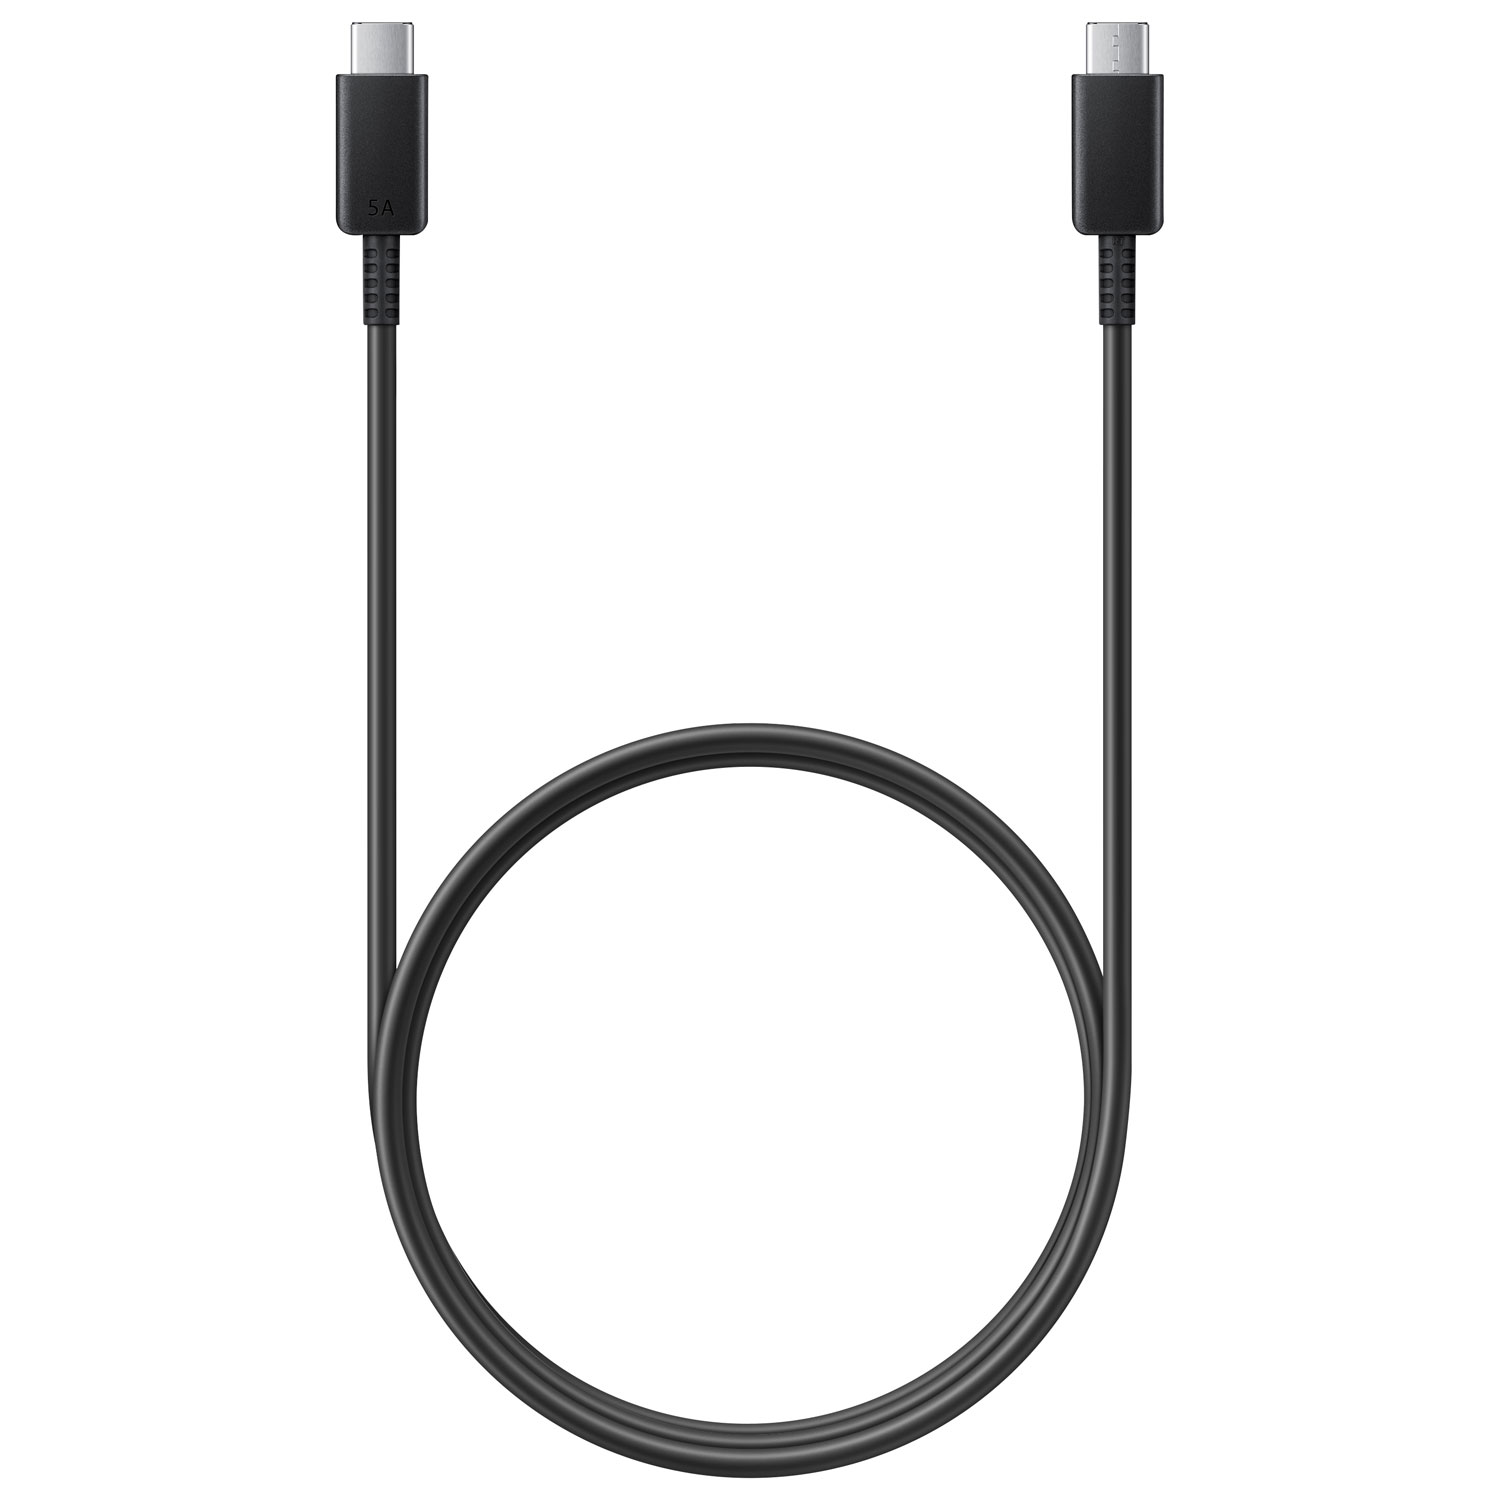 Samsung 1m (3.28 ft) USB-C to USB-C Charge Cable